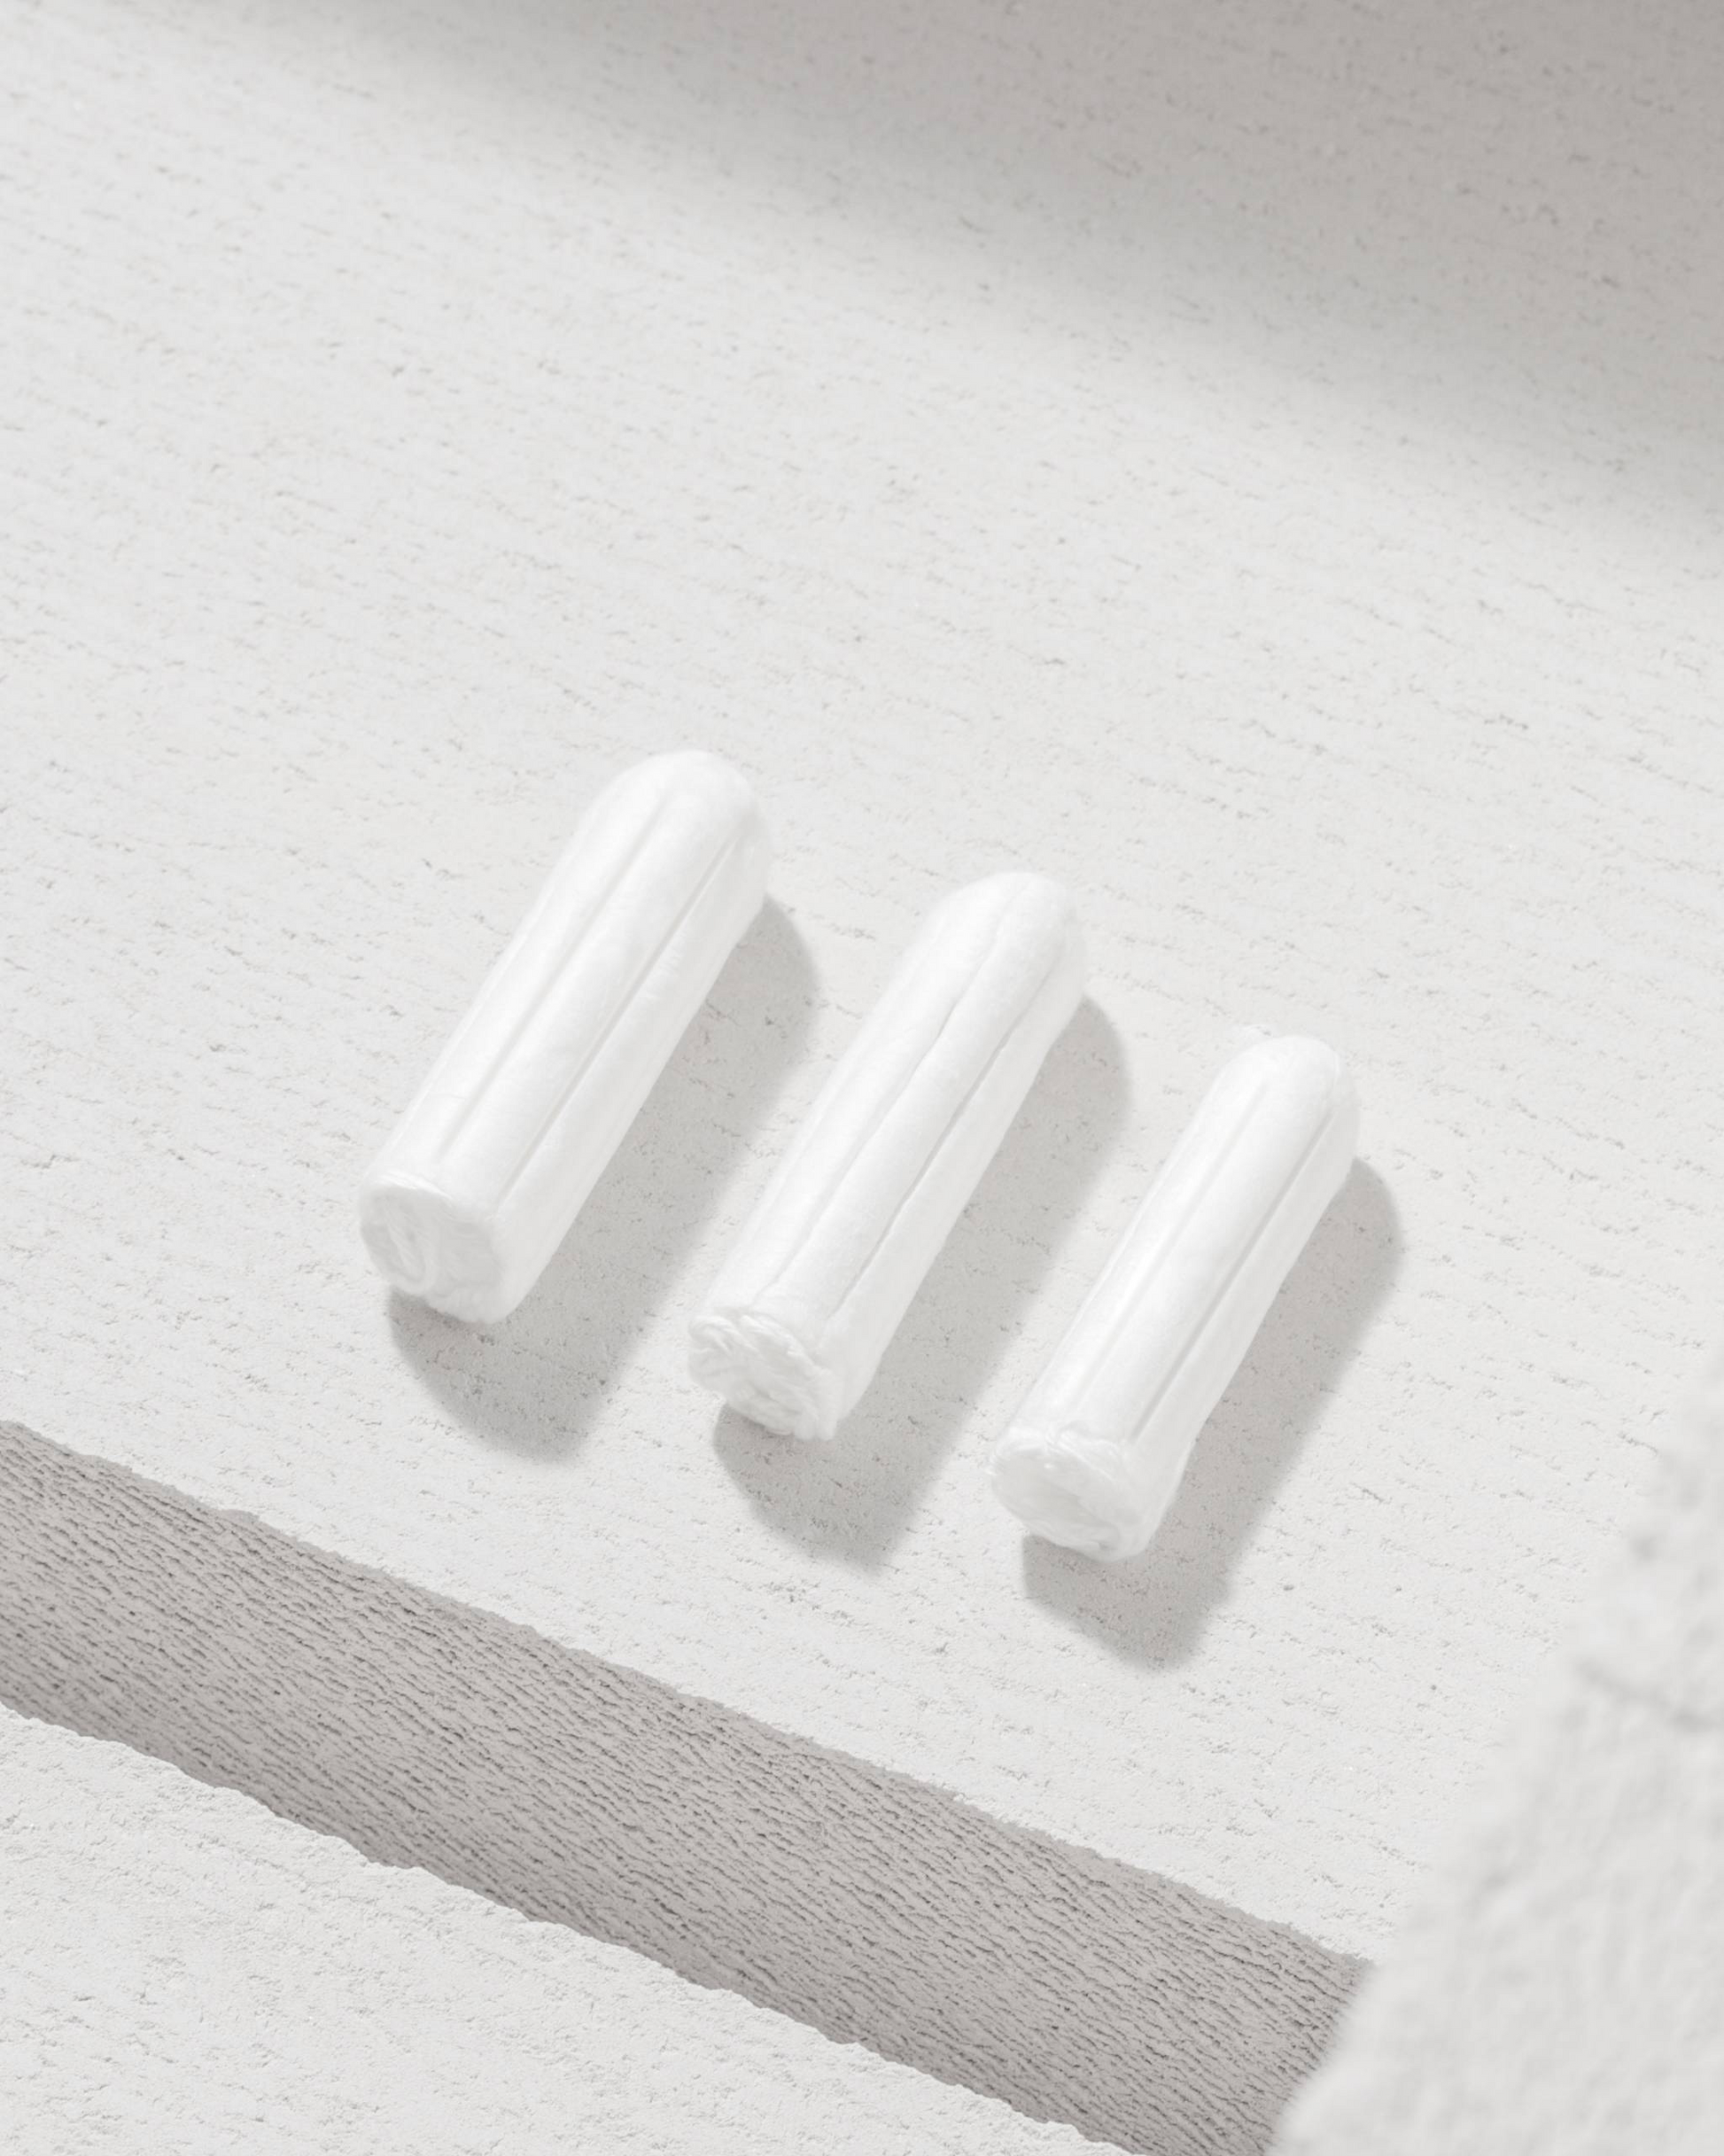 Image of 3 unpackaged non-applicator organic cotton tampons